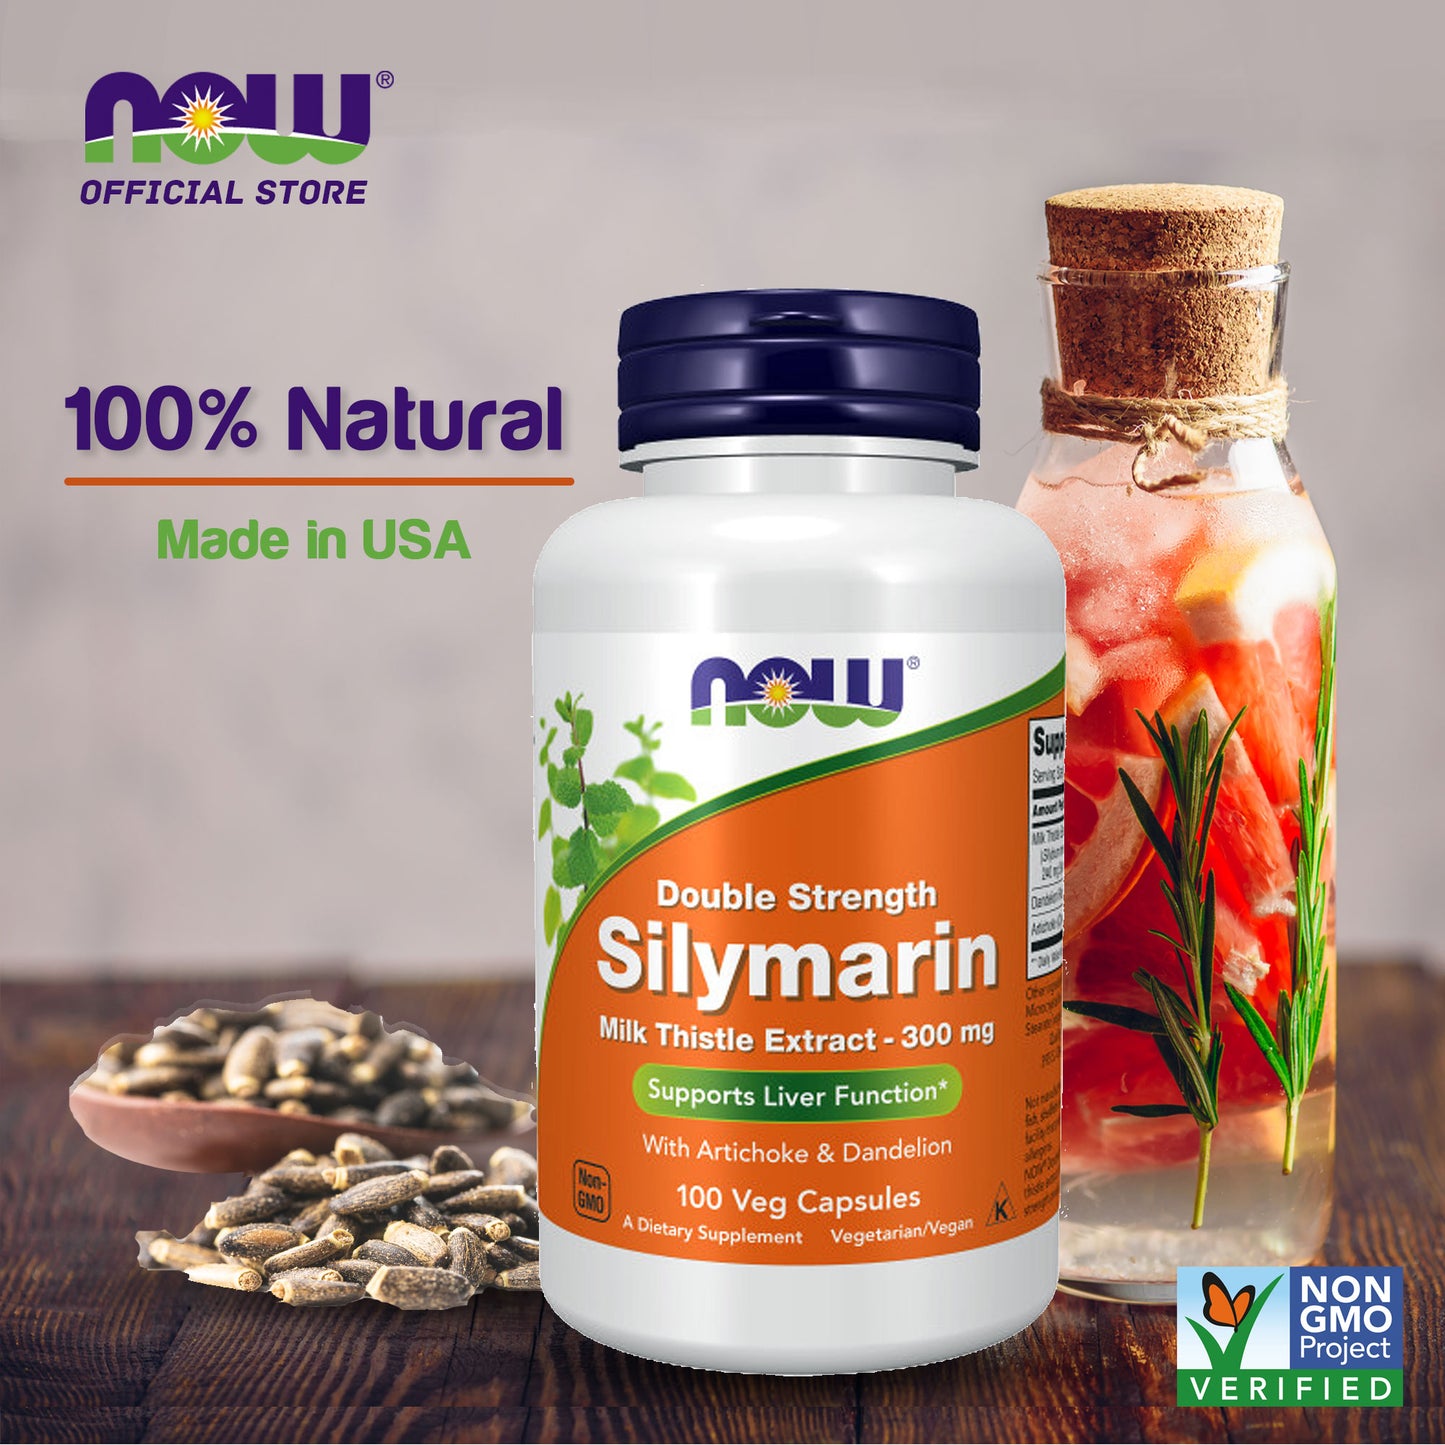 NOW Supplements, Silymarin Milk Thistle Extract 300 mg with Artichoke and Dandelion, Double Strength, Supports Liver Function, 100 Veg Capsules